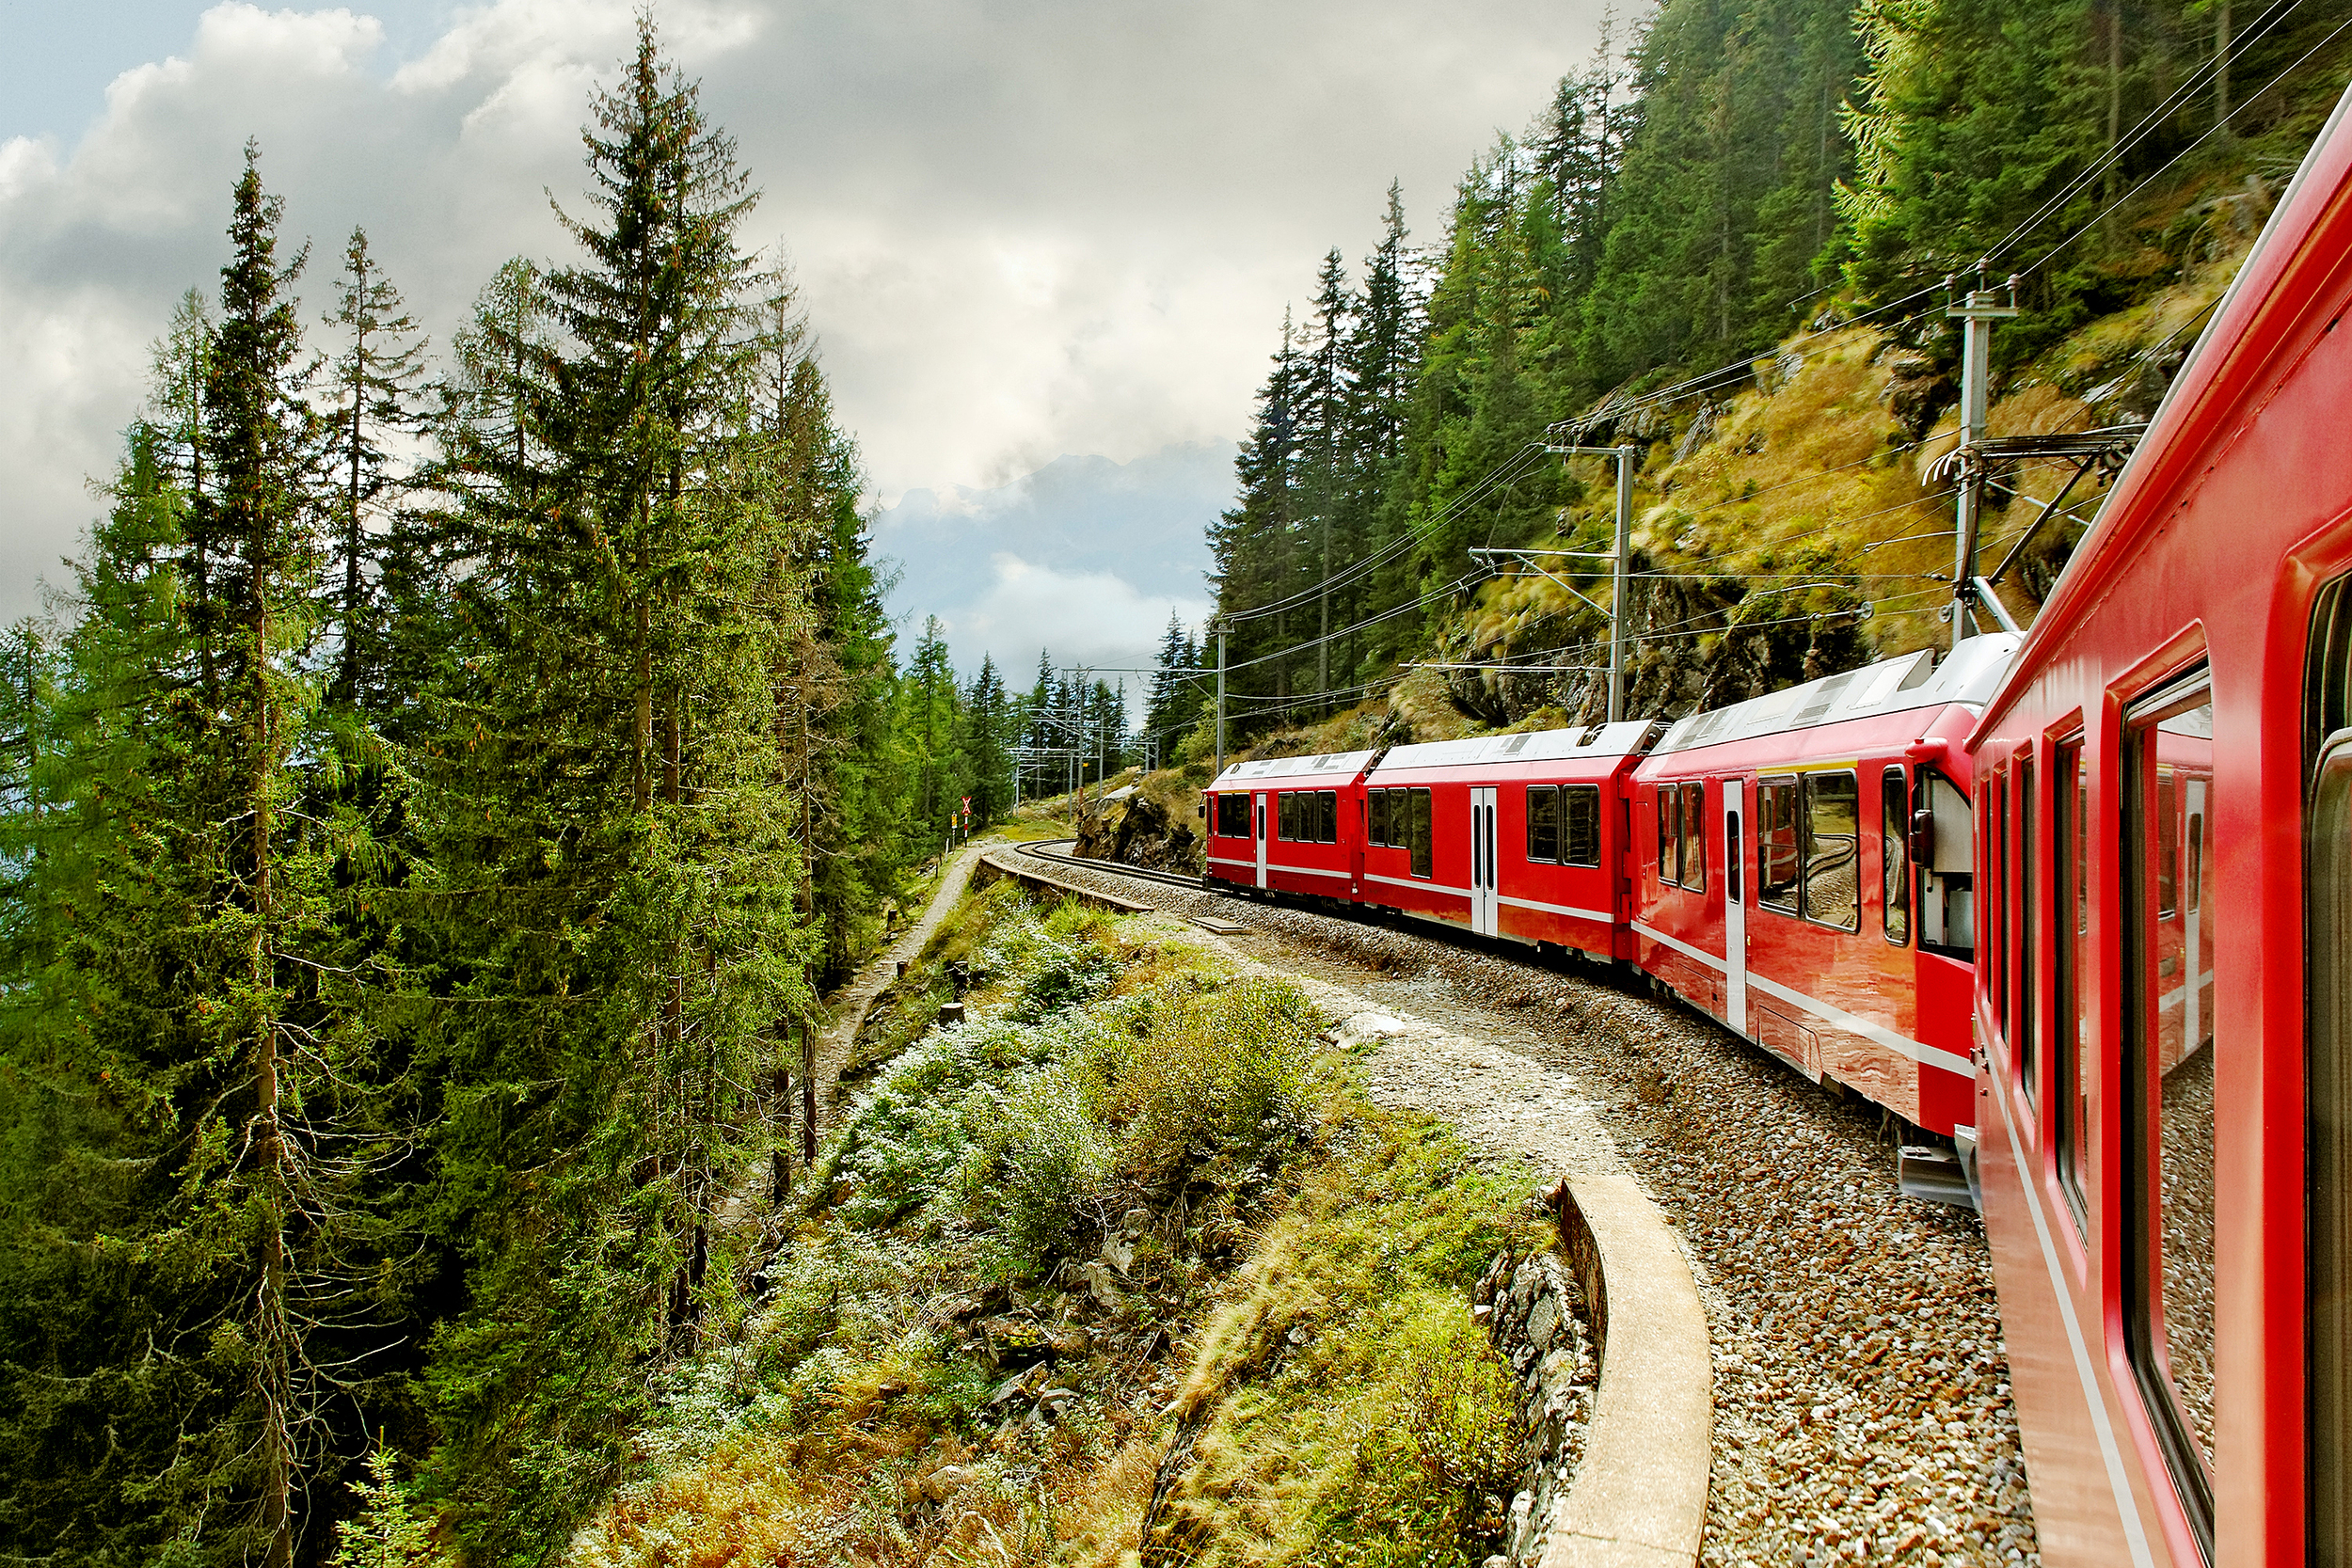 A red train on the mountain edge